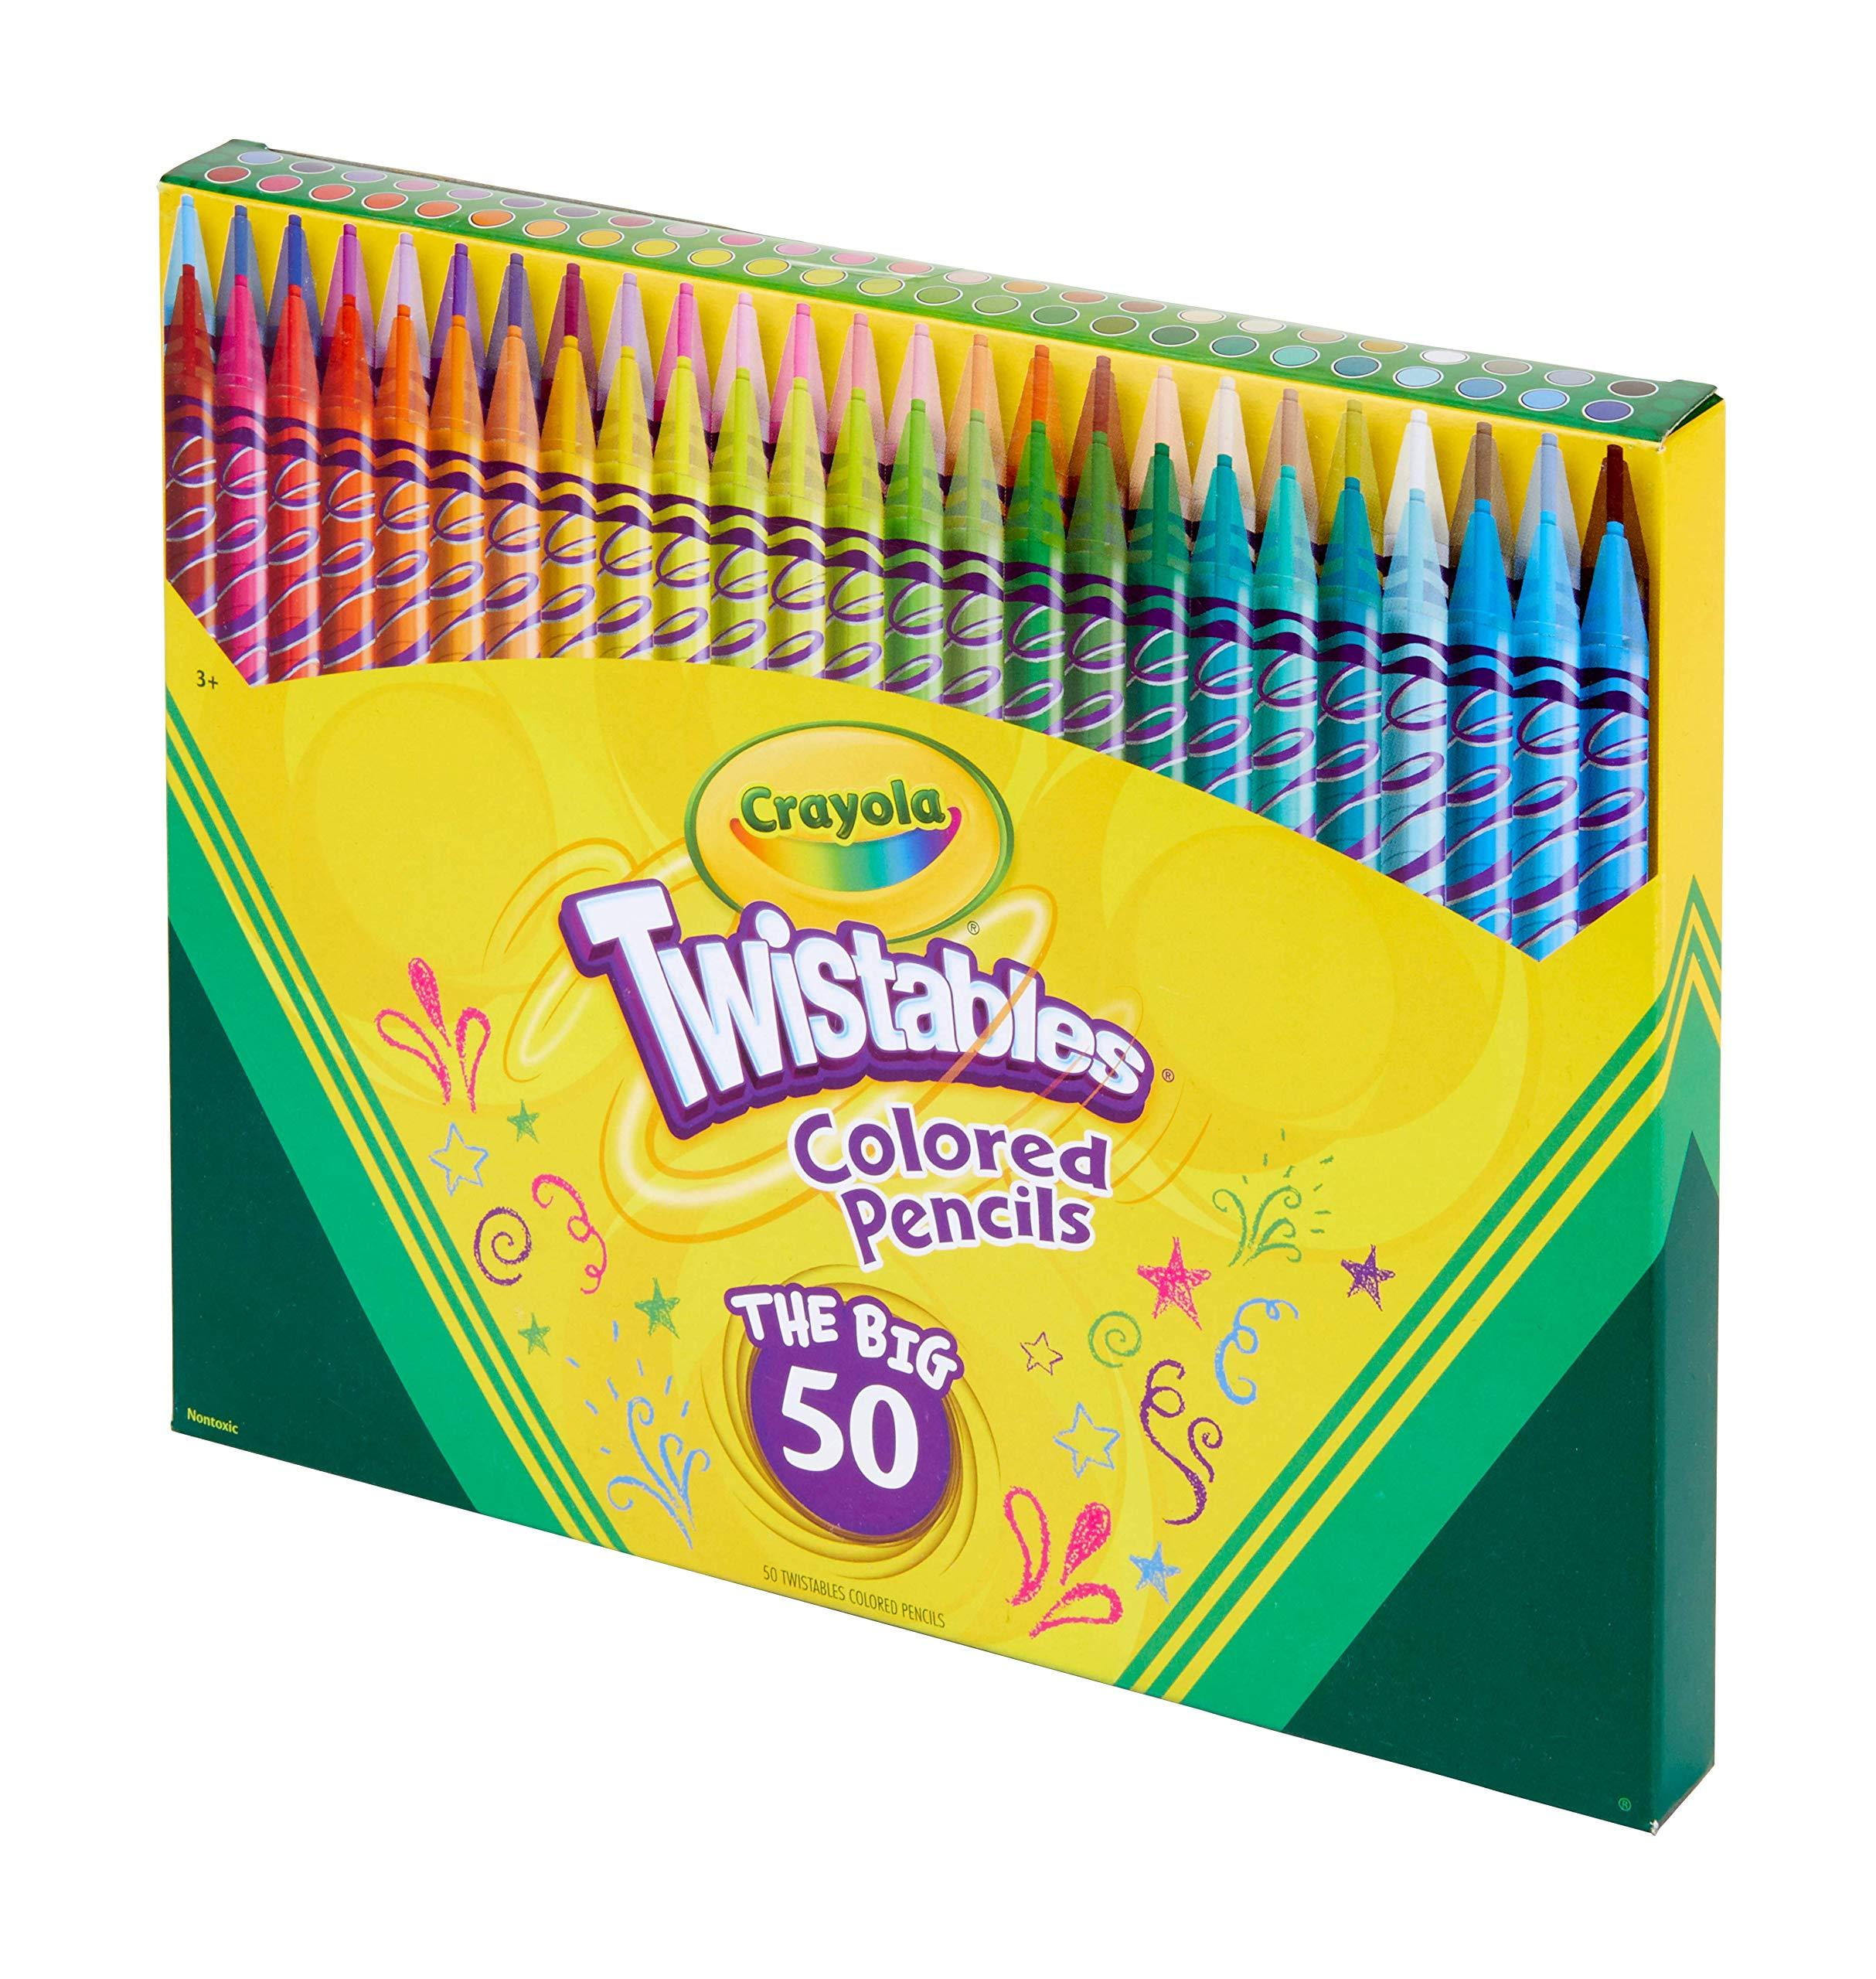  Crayola Twistables Colored Pencil Set (50ct), No Sharpen Colored  Pencils For Kids, Kids Art Supplies, Coloring Set, Gifts, 4+ [  Exclusive] : Toys & Games